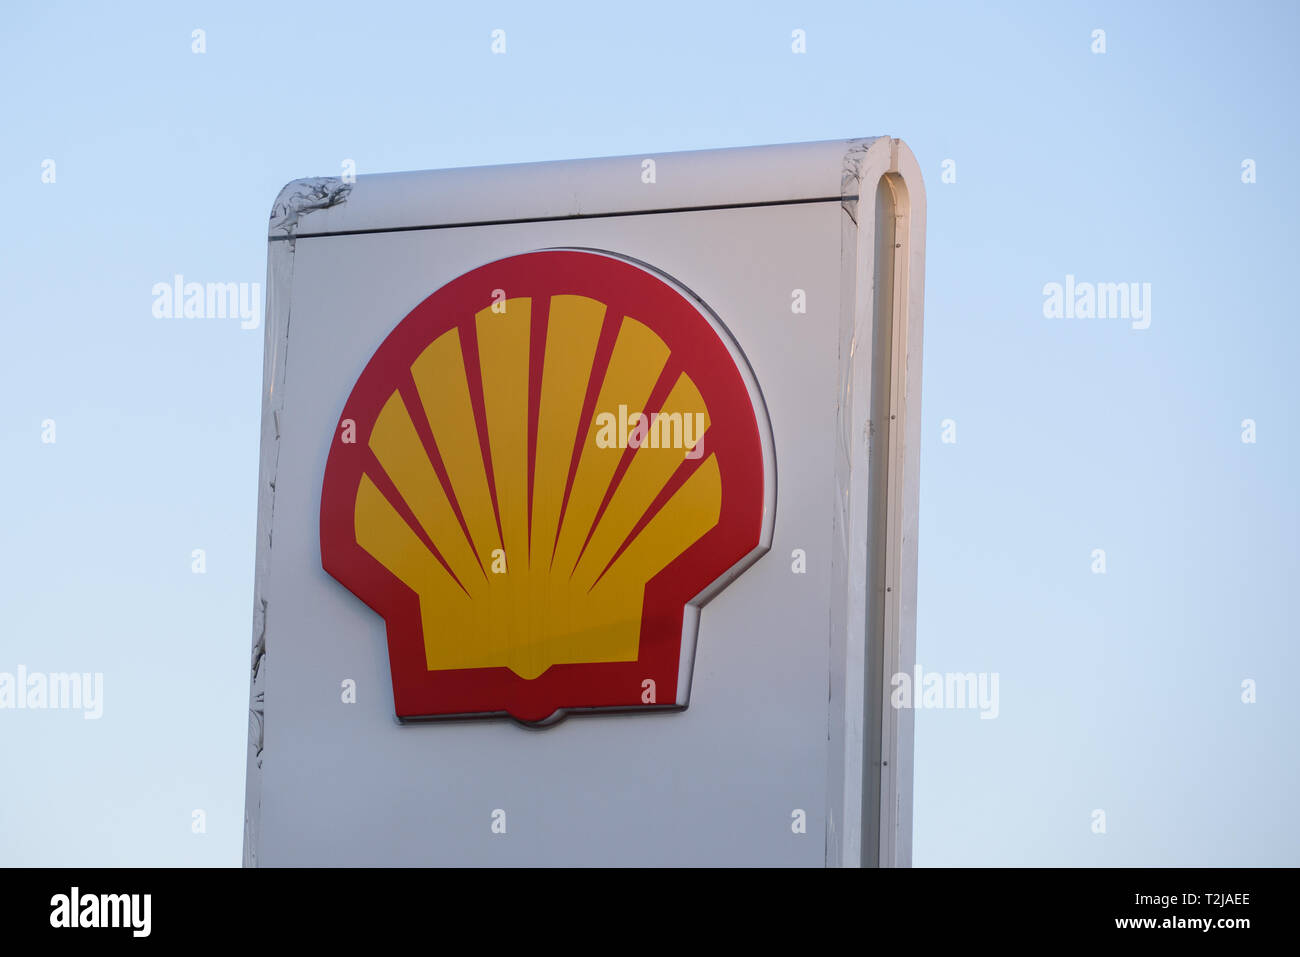 02.04.2019. RIGA, LATVIA. Logo of Shell oil company on gas station. Shell is United States-based wholly owned subsidiary of Royal Dutch Shell. Stock Photo